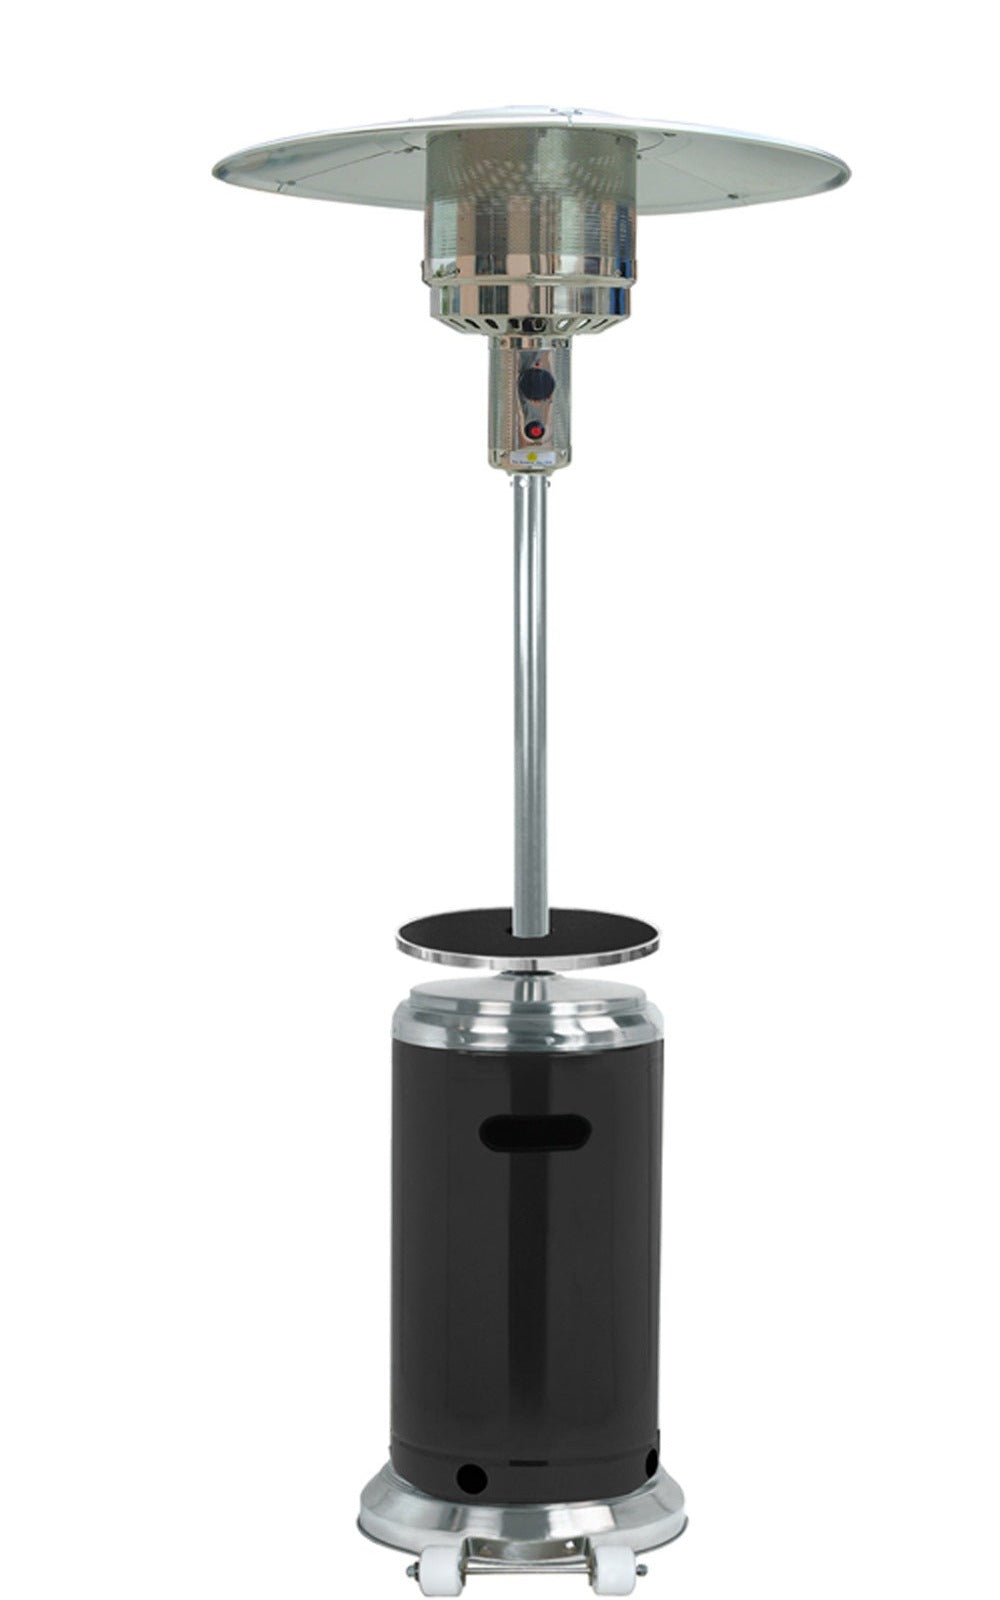 Hiland 87" Two Tone Outdoor Patio Heater with Table Black & Stainless Steel-HLDS01-SSBLT- Main View